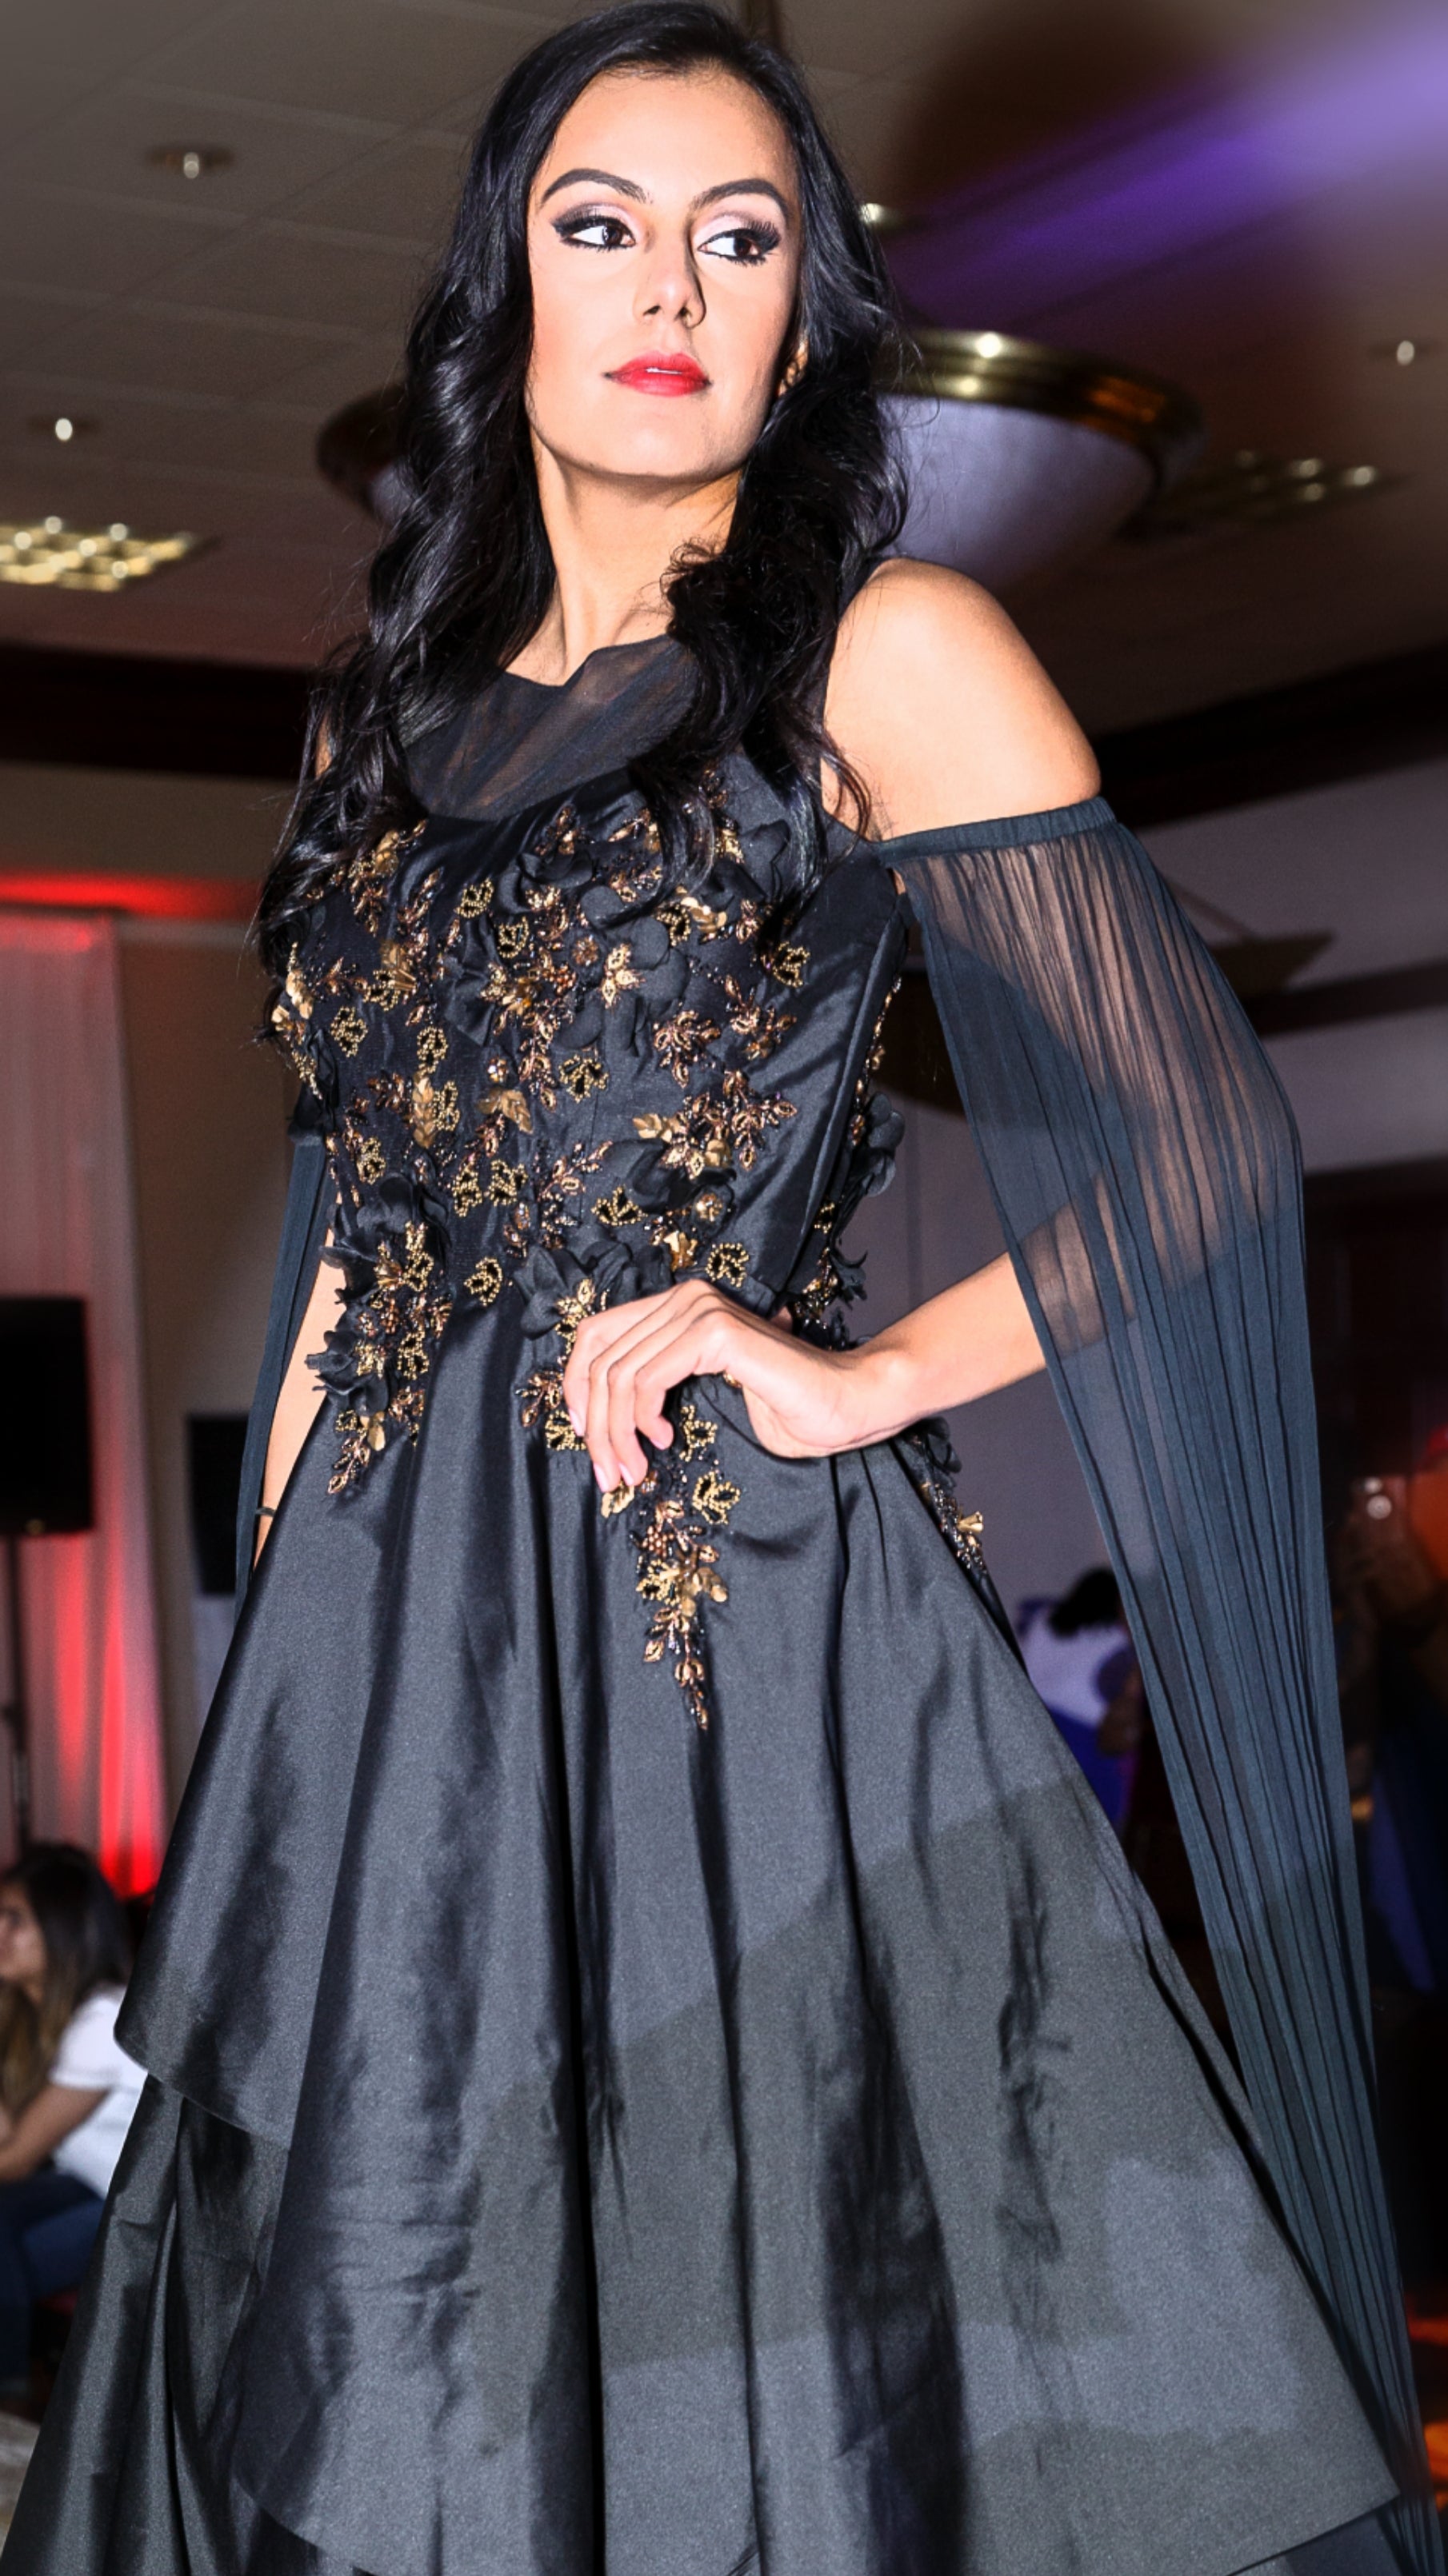 Womens silk black color gown with gold hand embroidery worn by a fashion model